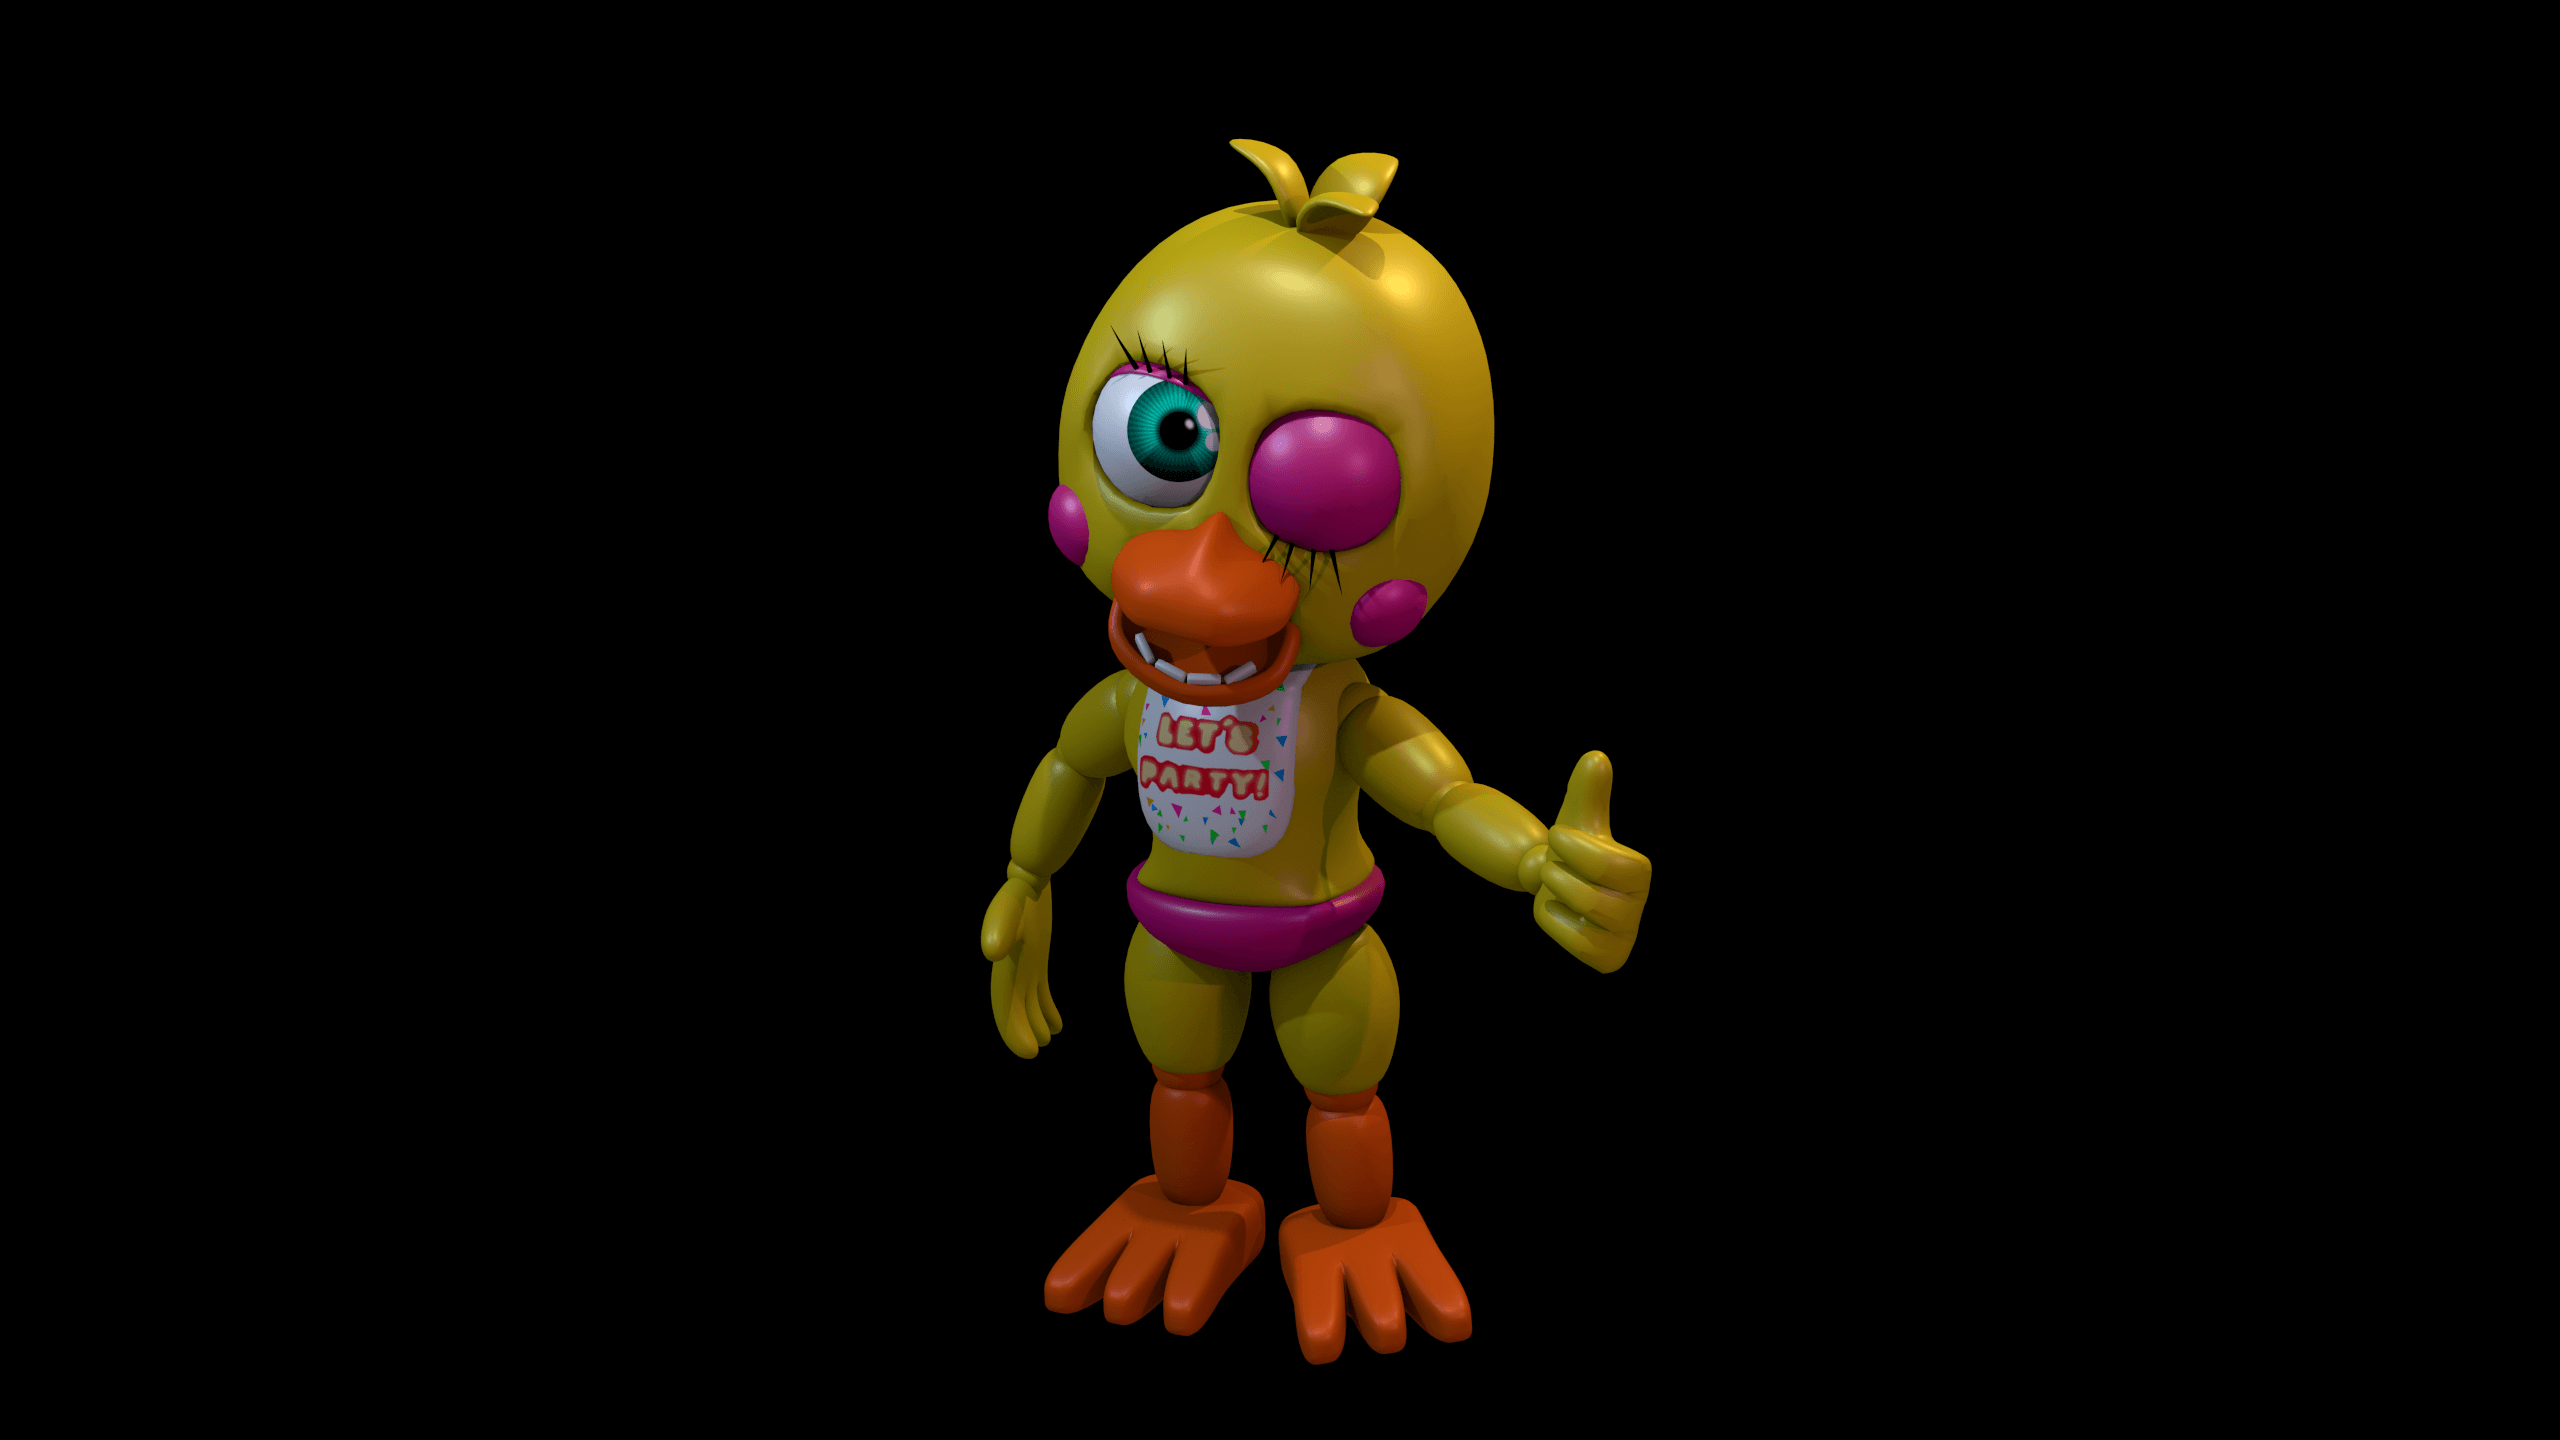 Adv. Toy Chica Finally rigged! now to port it